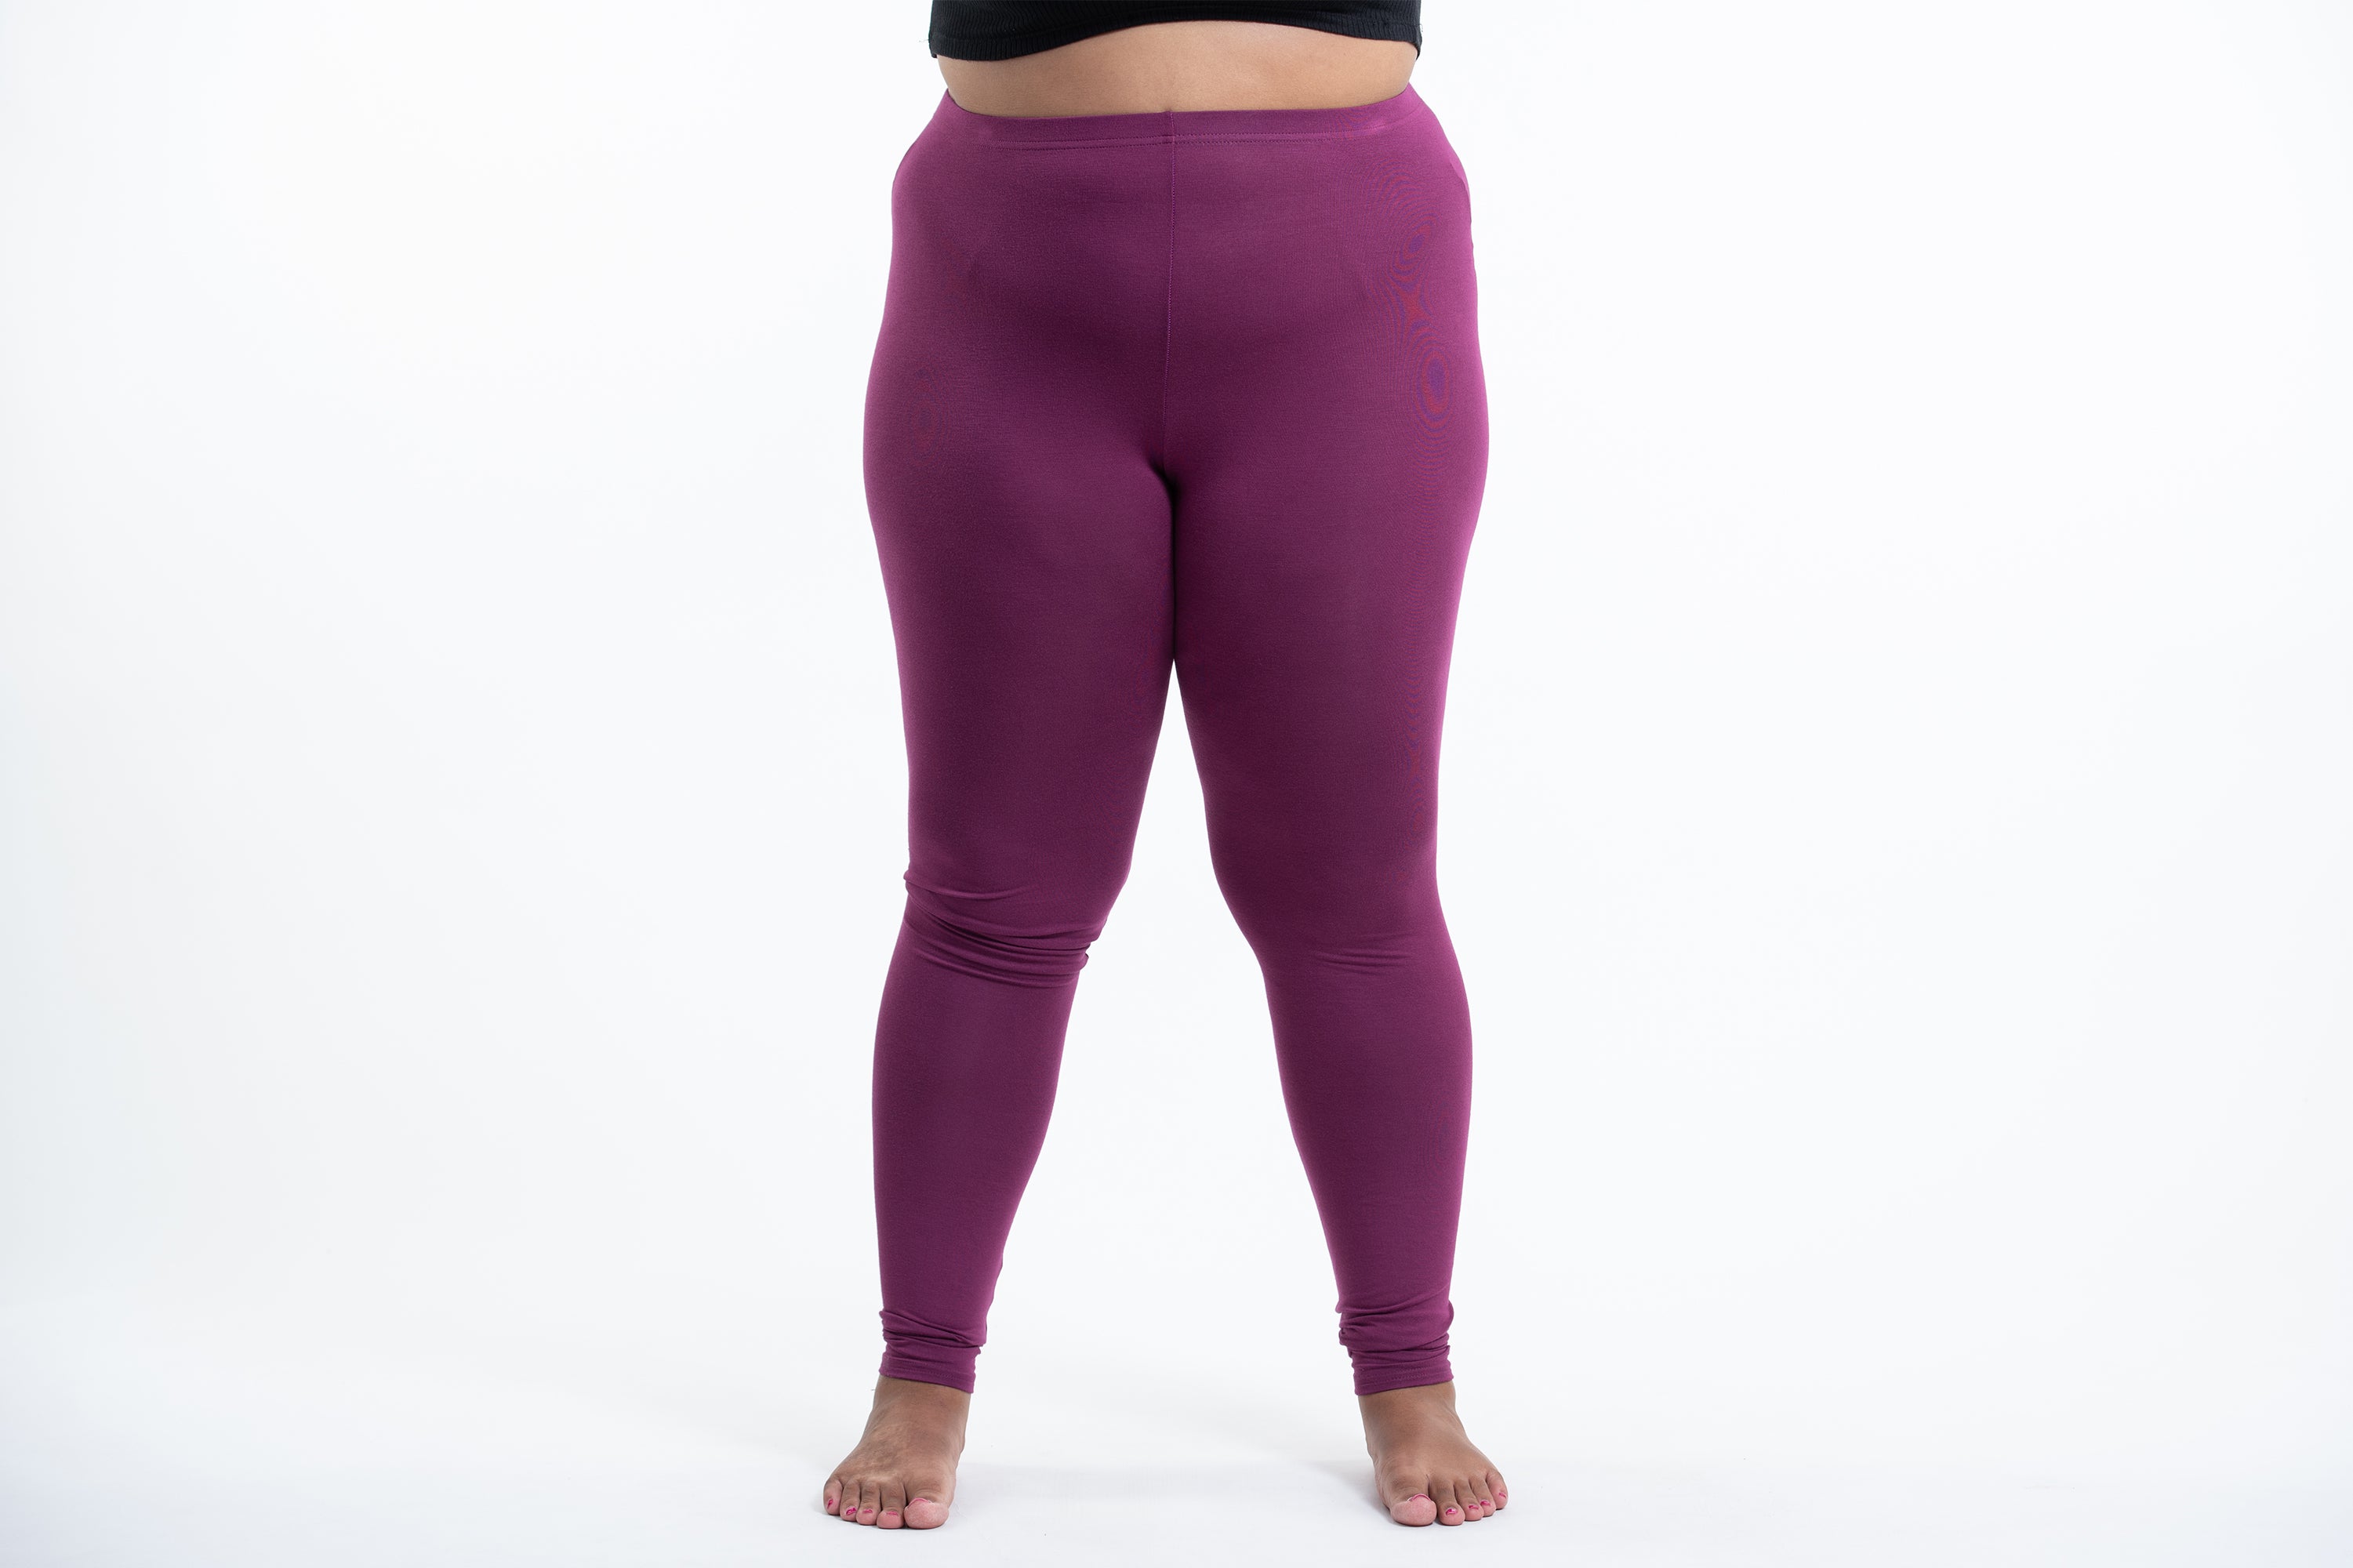 Plus Size Solid Color Cotton Leggings in Red – Harem Pants